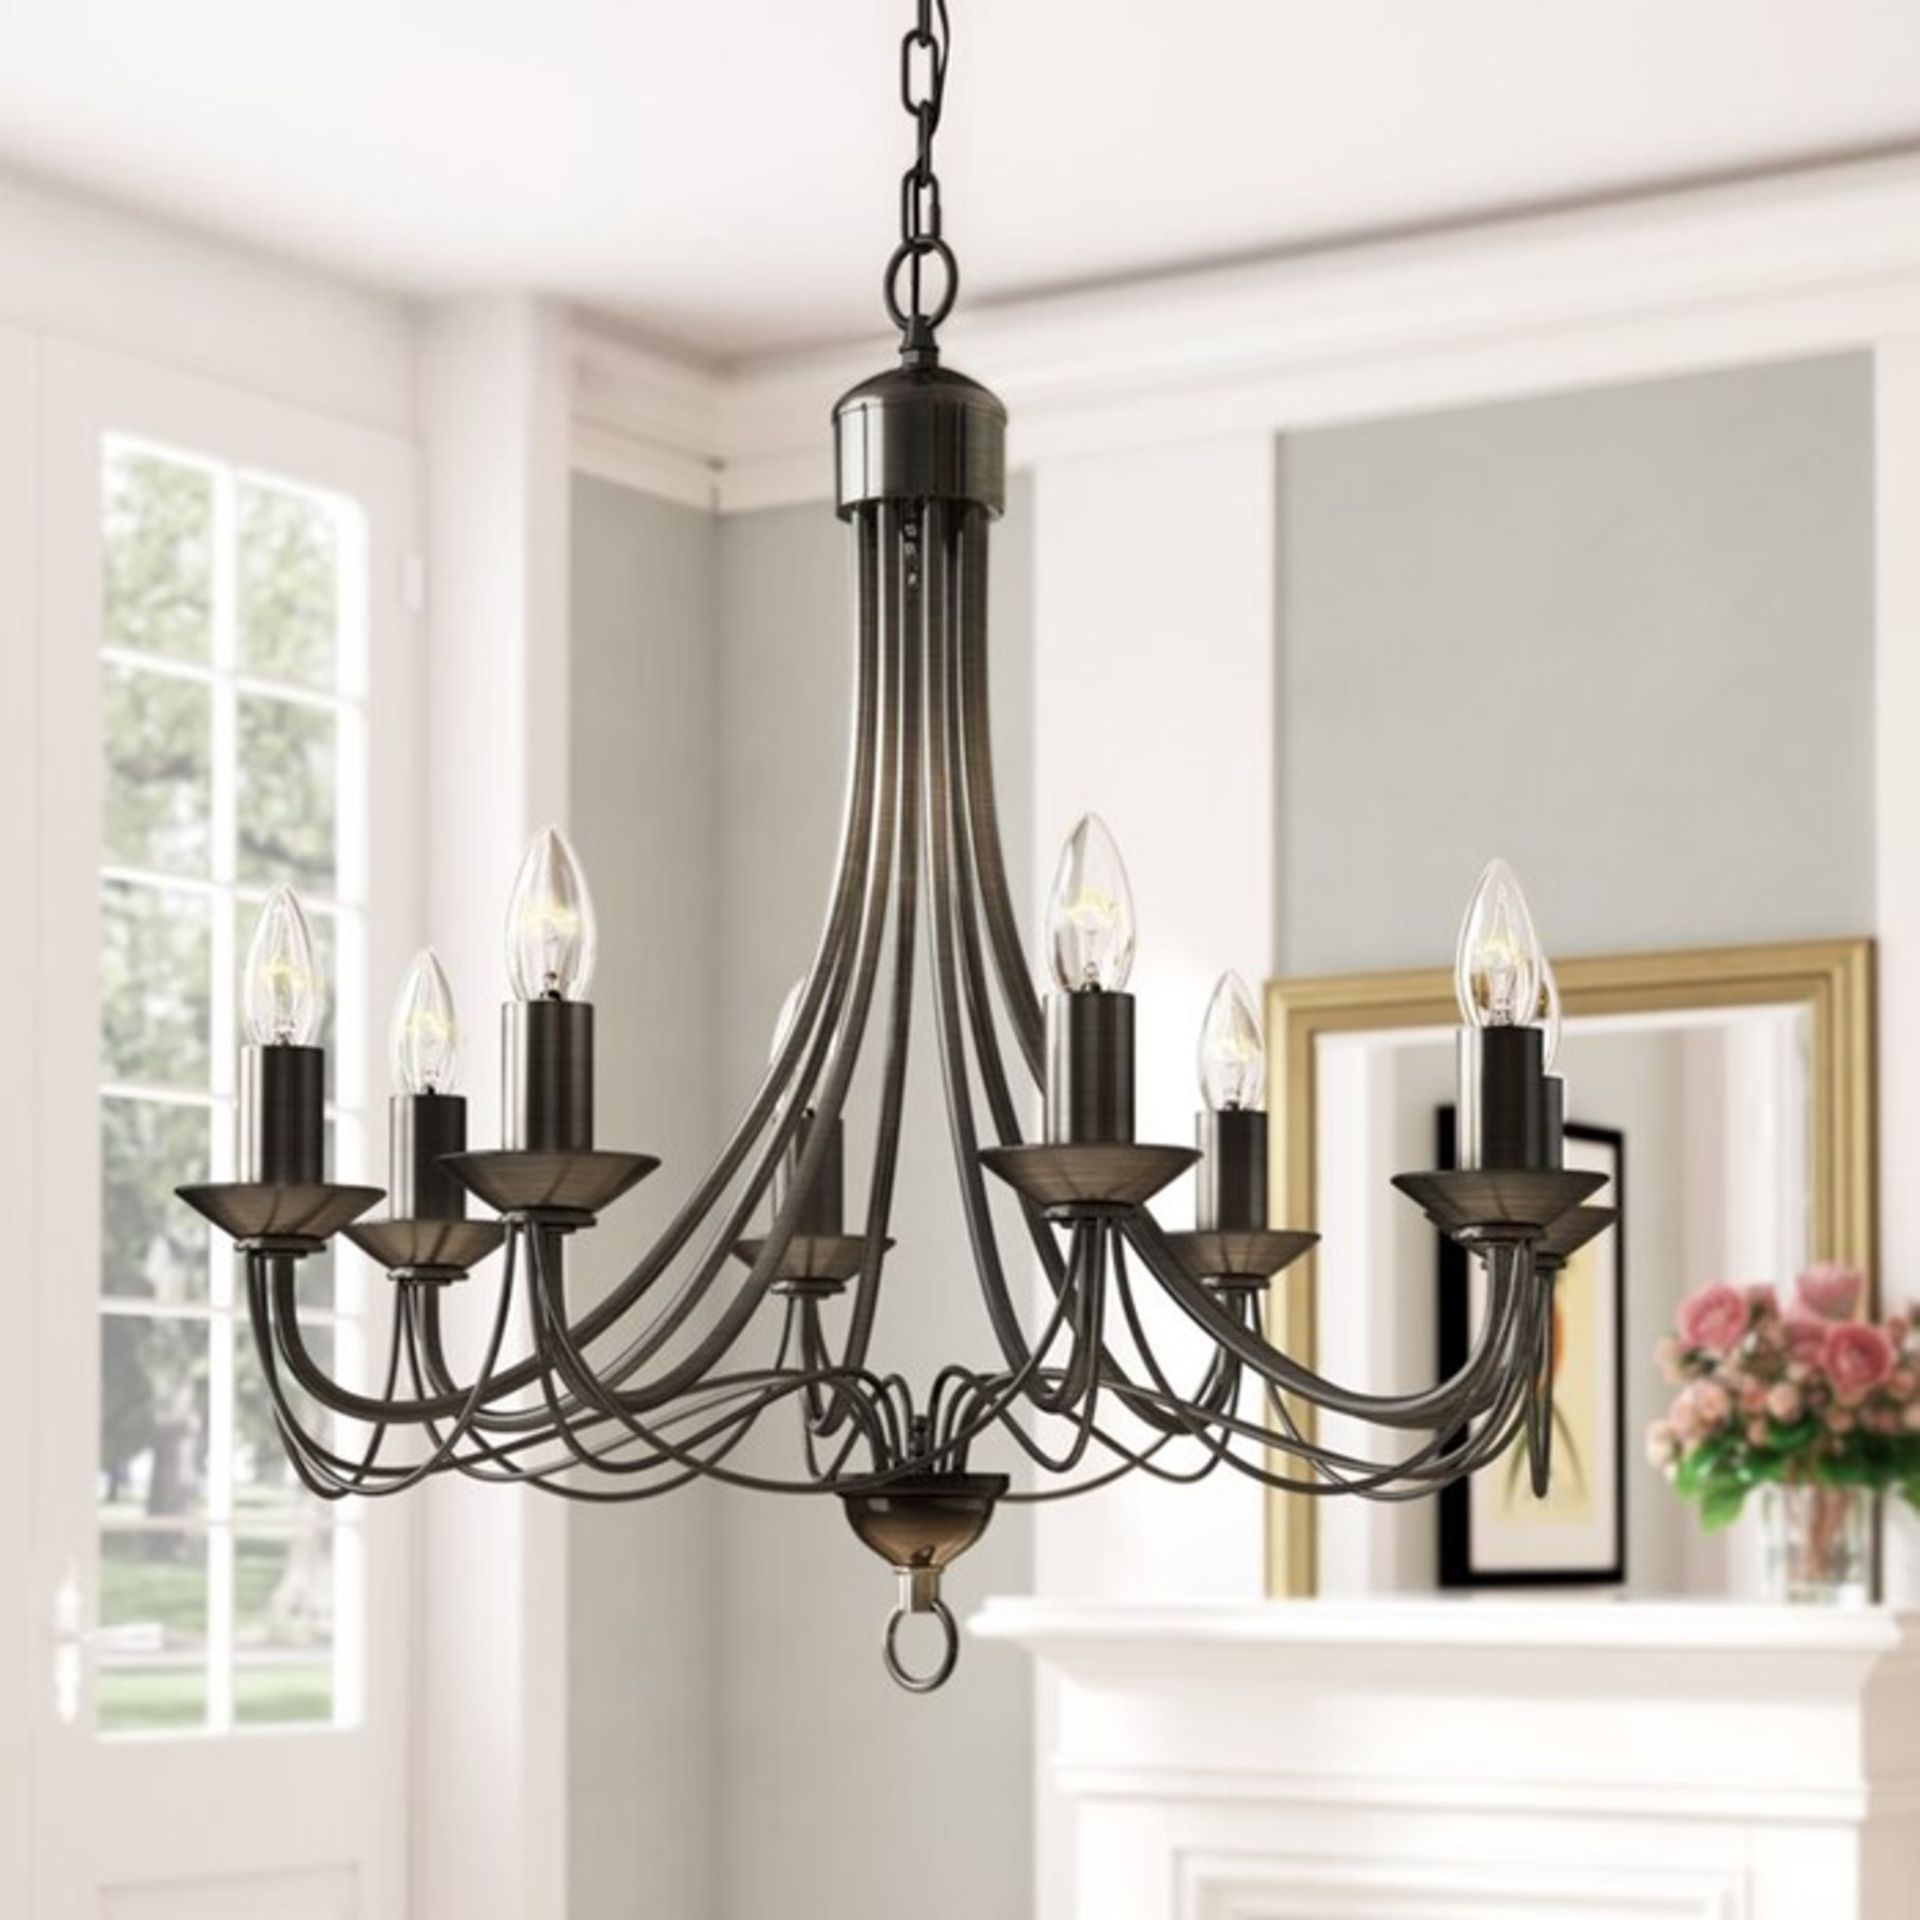 Marlow Home Co., Masam 8-Light Candle-Style Chandelier (SATIN SILVER) - RRP £103.99 (SRL1149 -